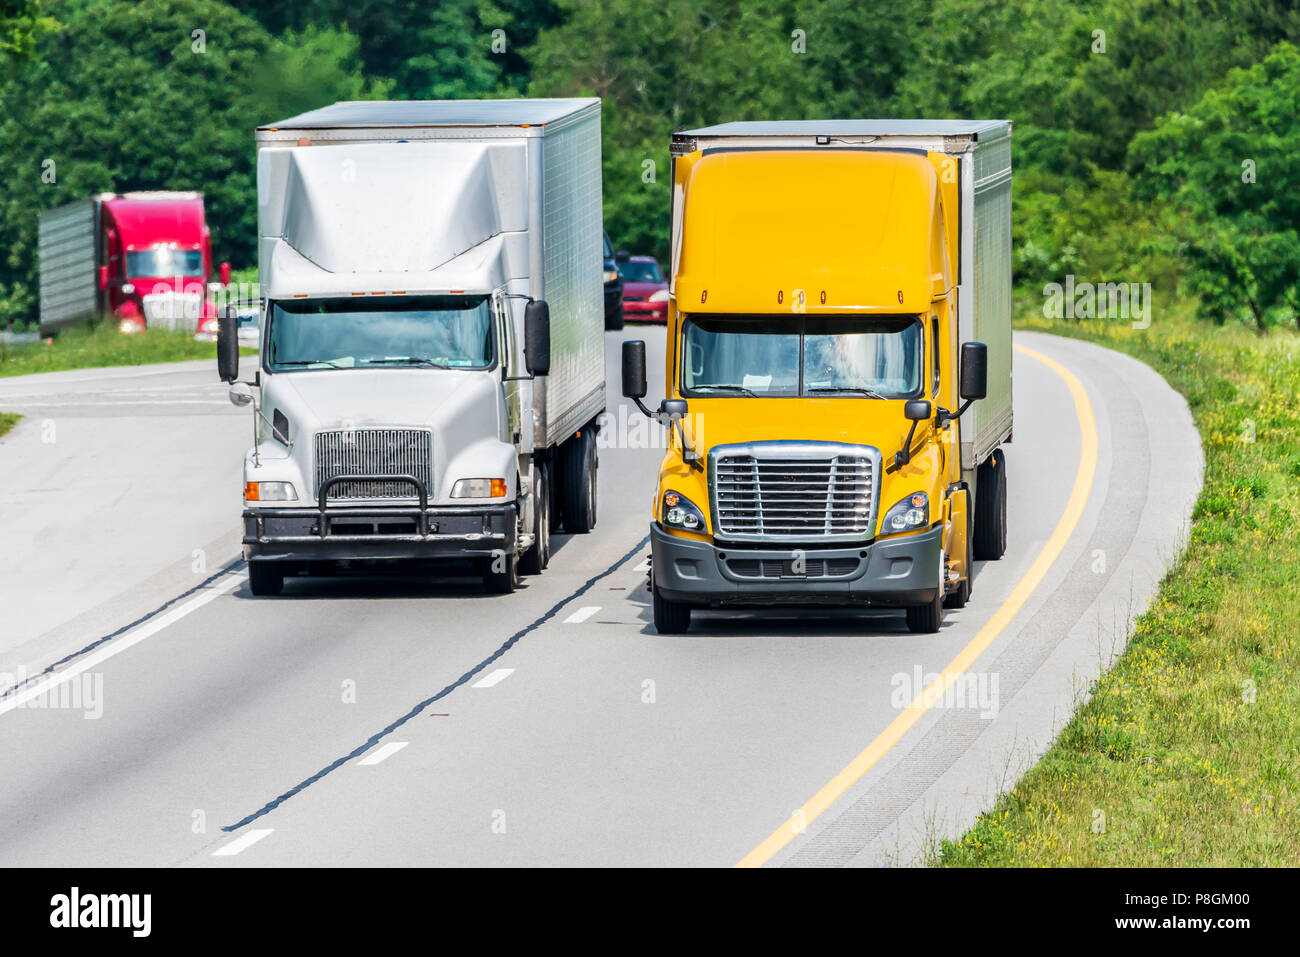 Heavy trucks and other vehicles travel a highway in Tennessee. Note: All logos and identifying marks have been removed from all vehicles.  Image was c Stock Photo